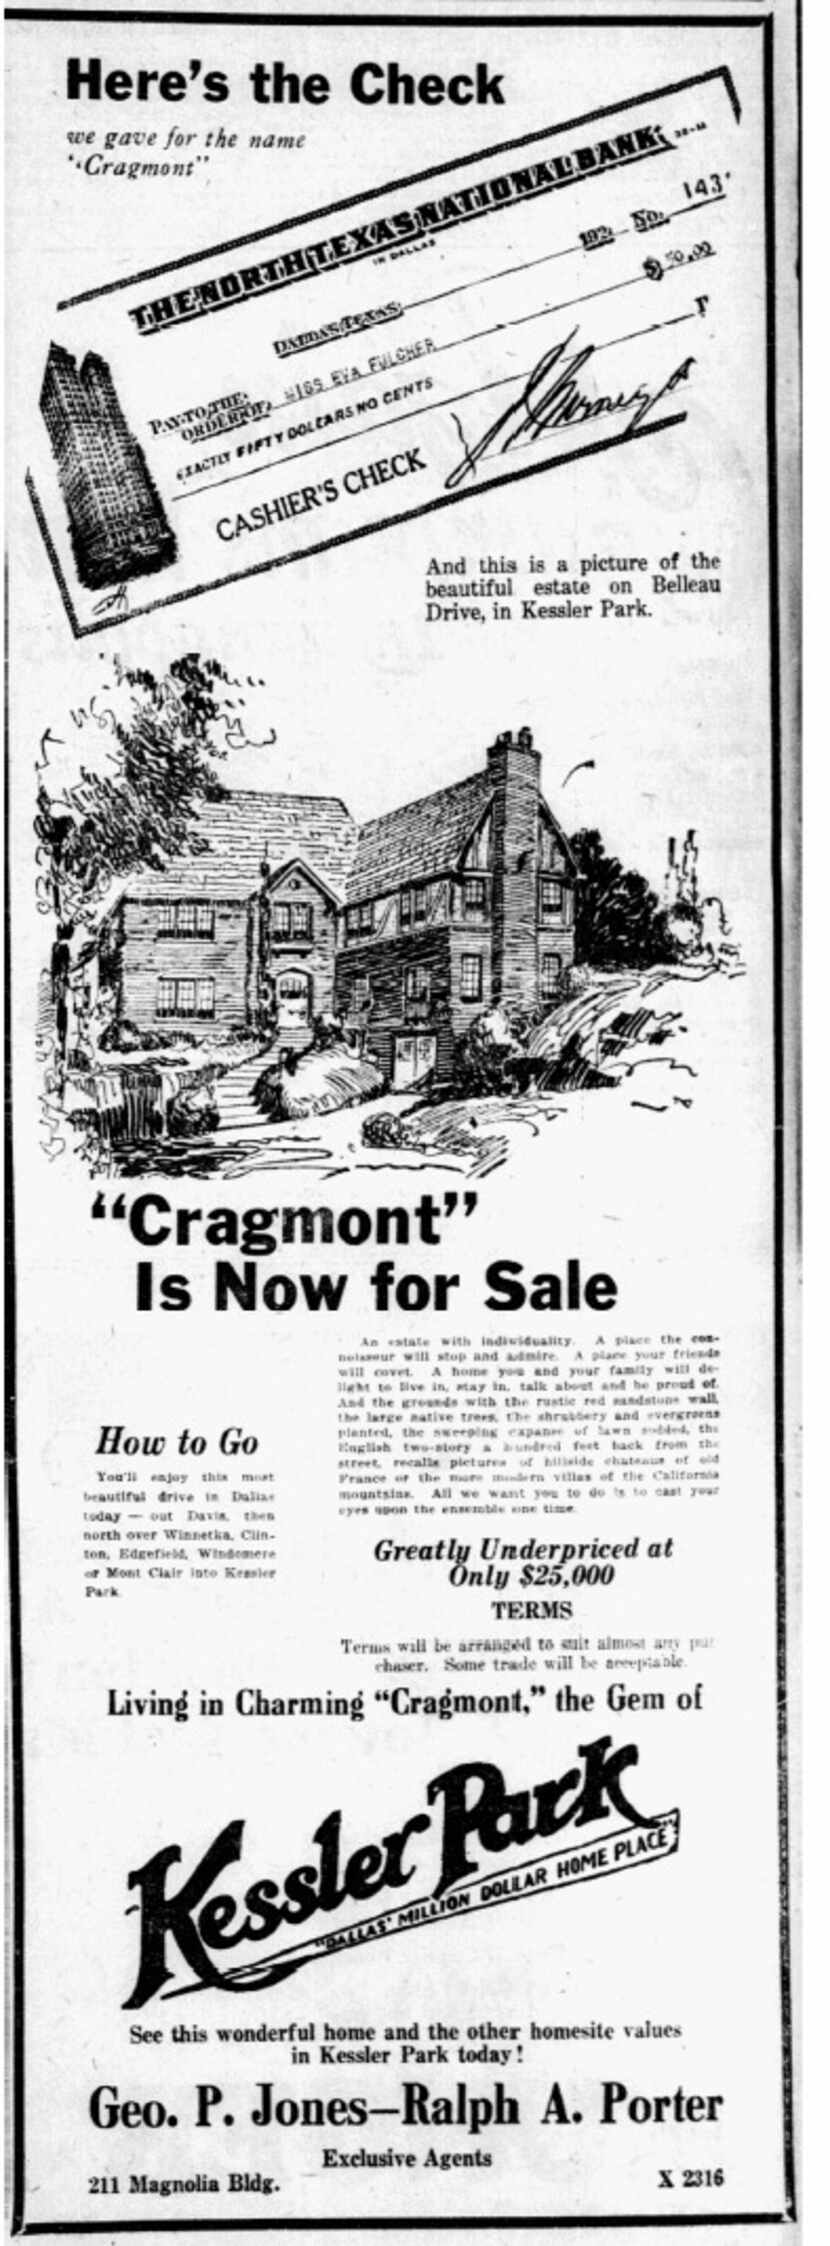 This advertisement from a May 31, 1925 edition of The Dallas Morning News shows an estate on...